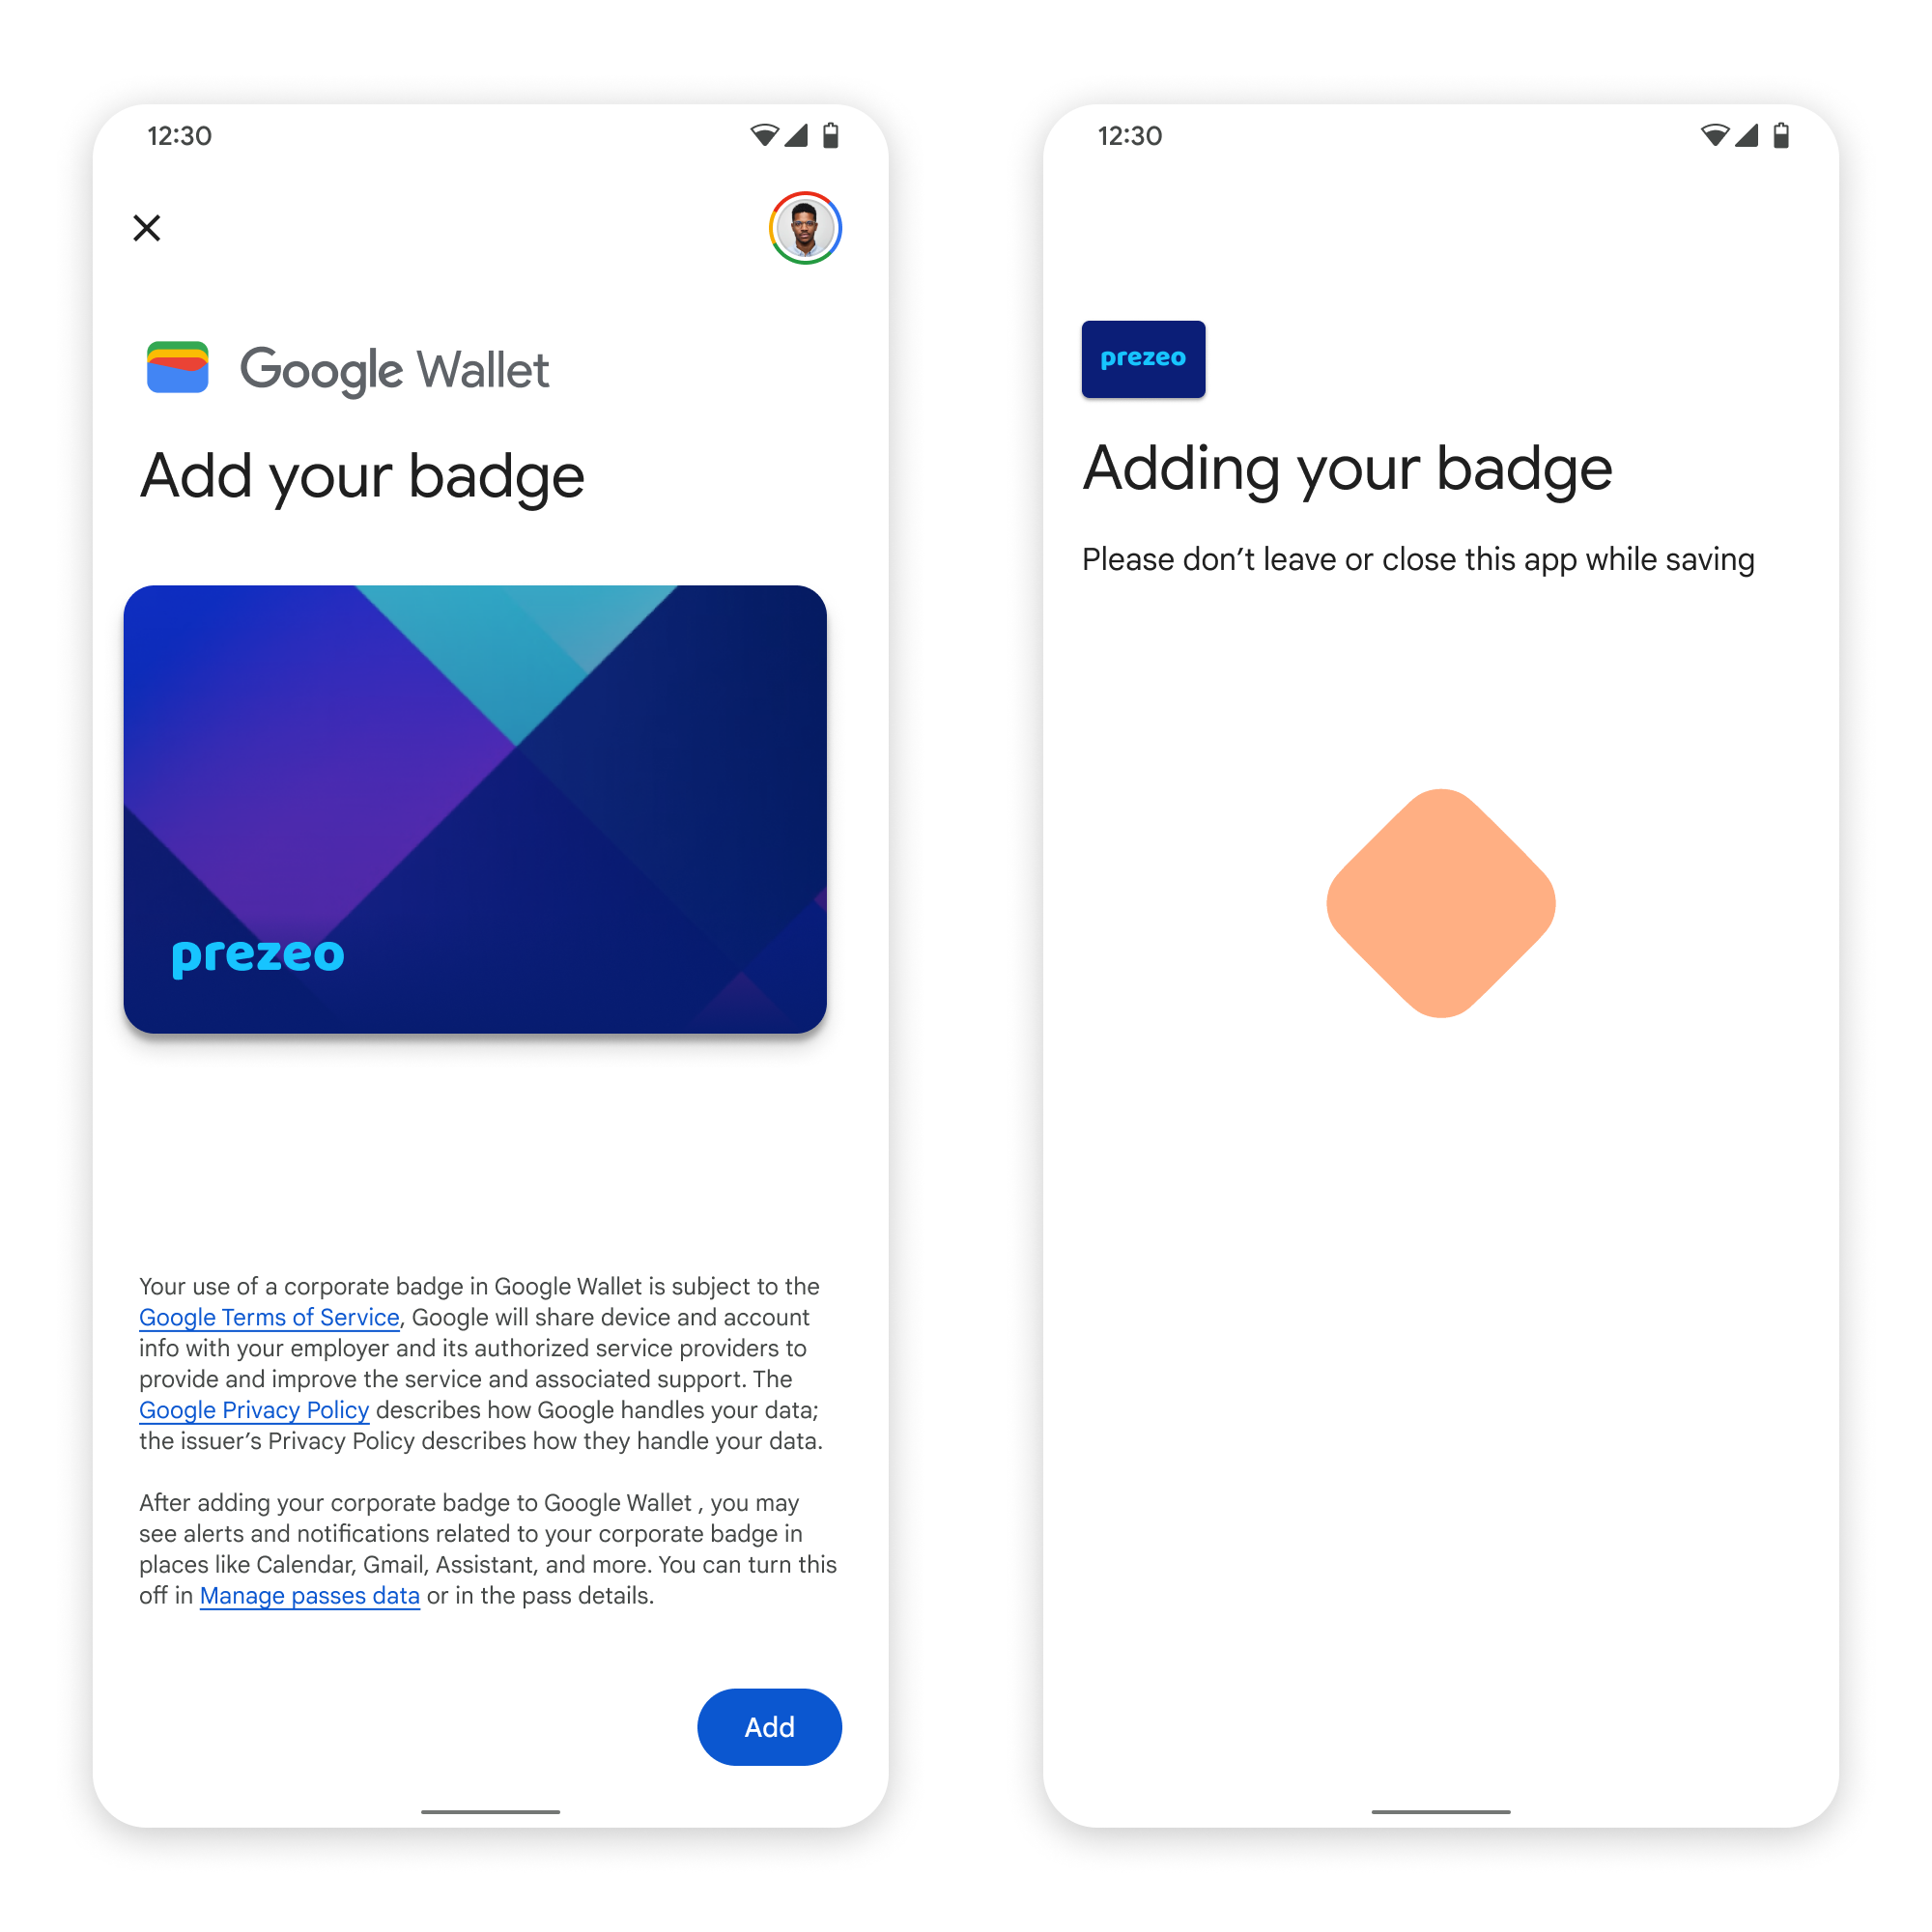 In first screen, the app connects to Google Wallet. In
       the second screen, the user accepts the Terms of Service and continues.